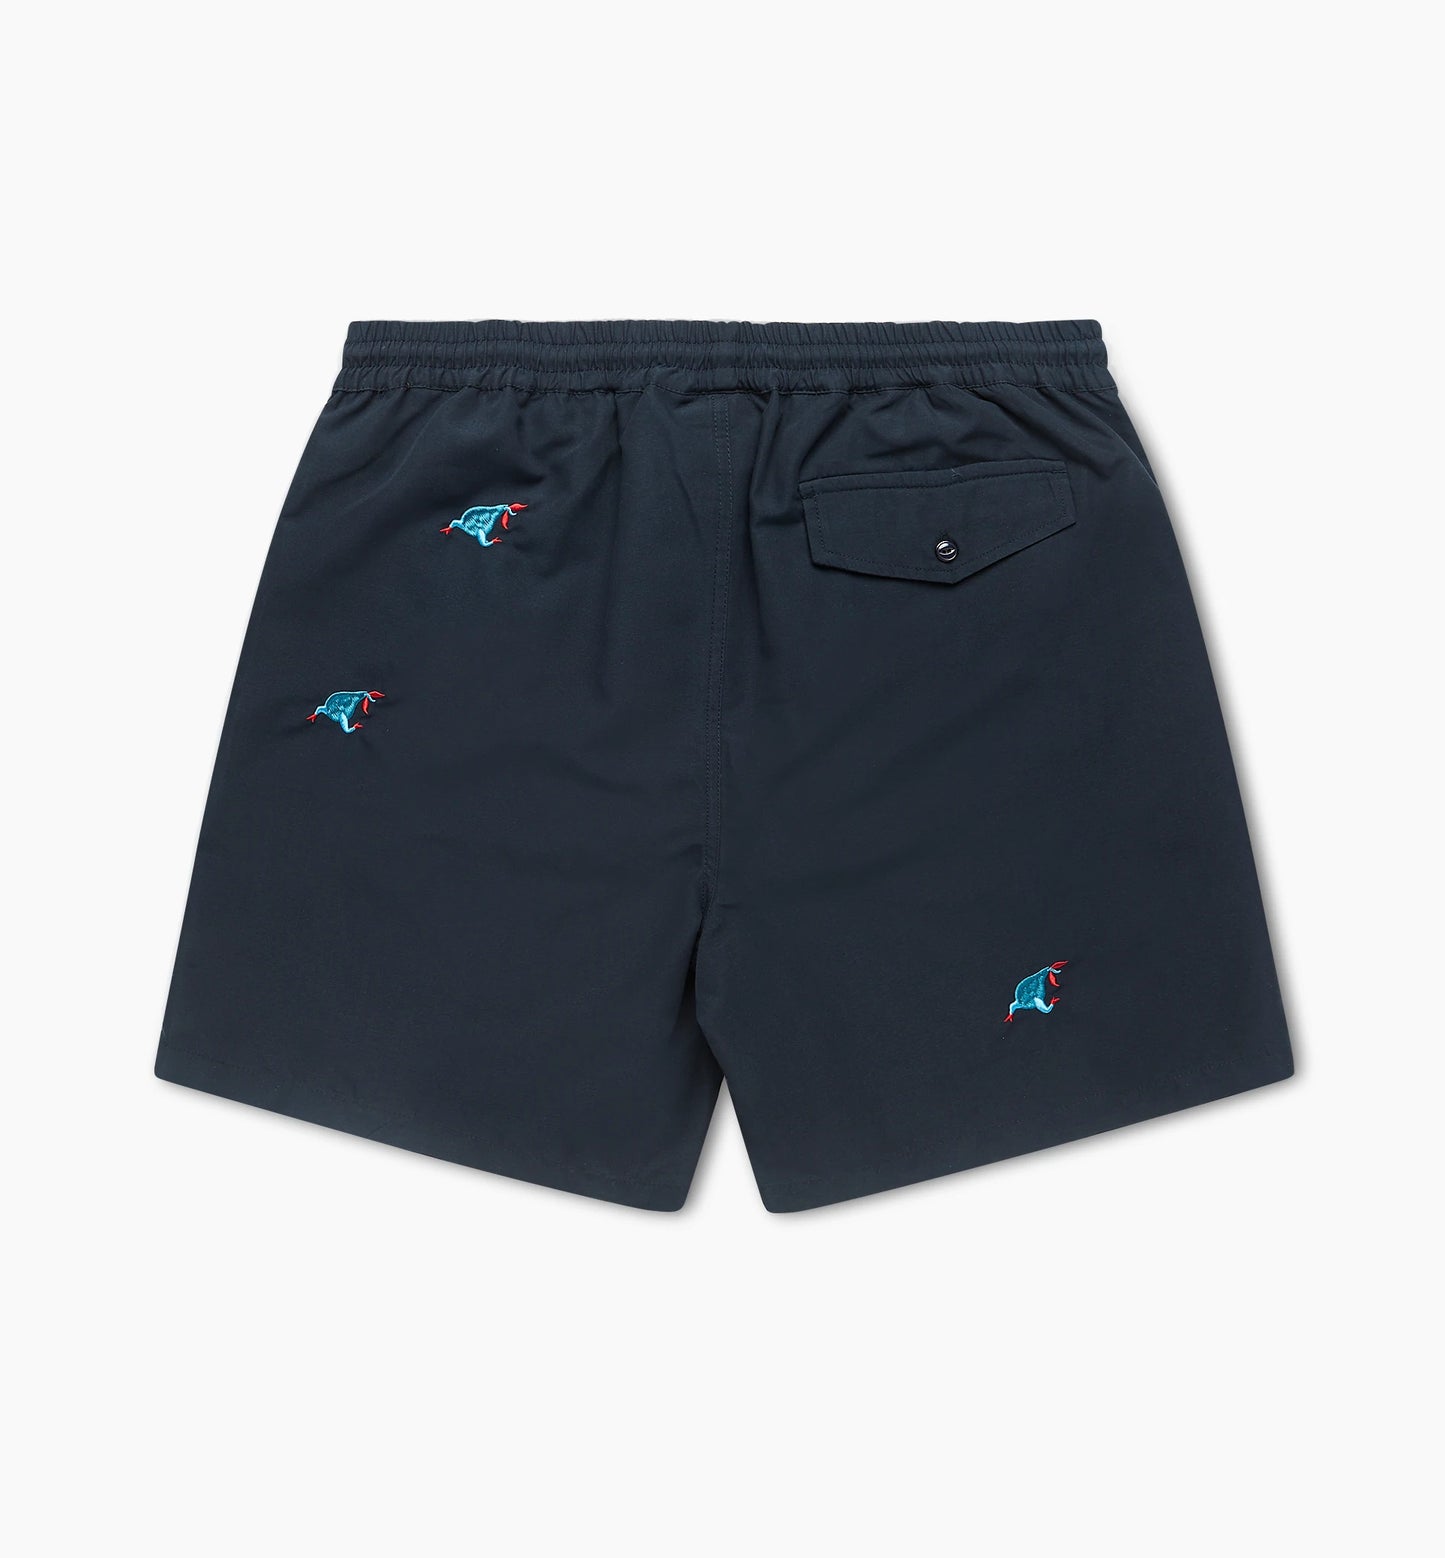 By Parra Running Pear Swim Shorts Navy Blue